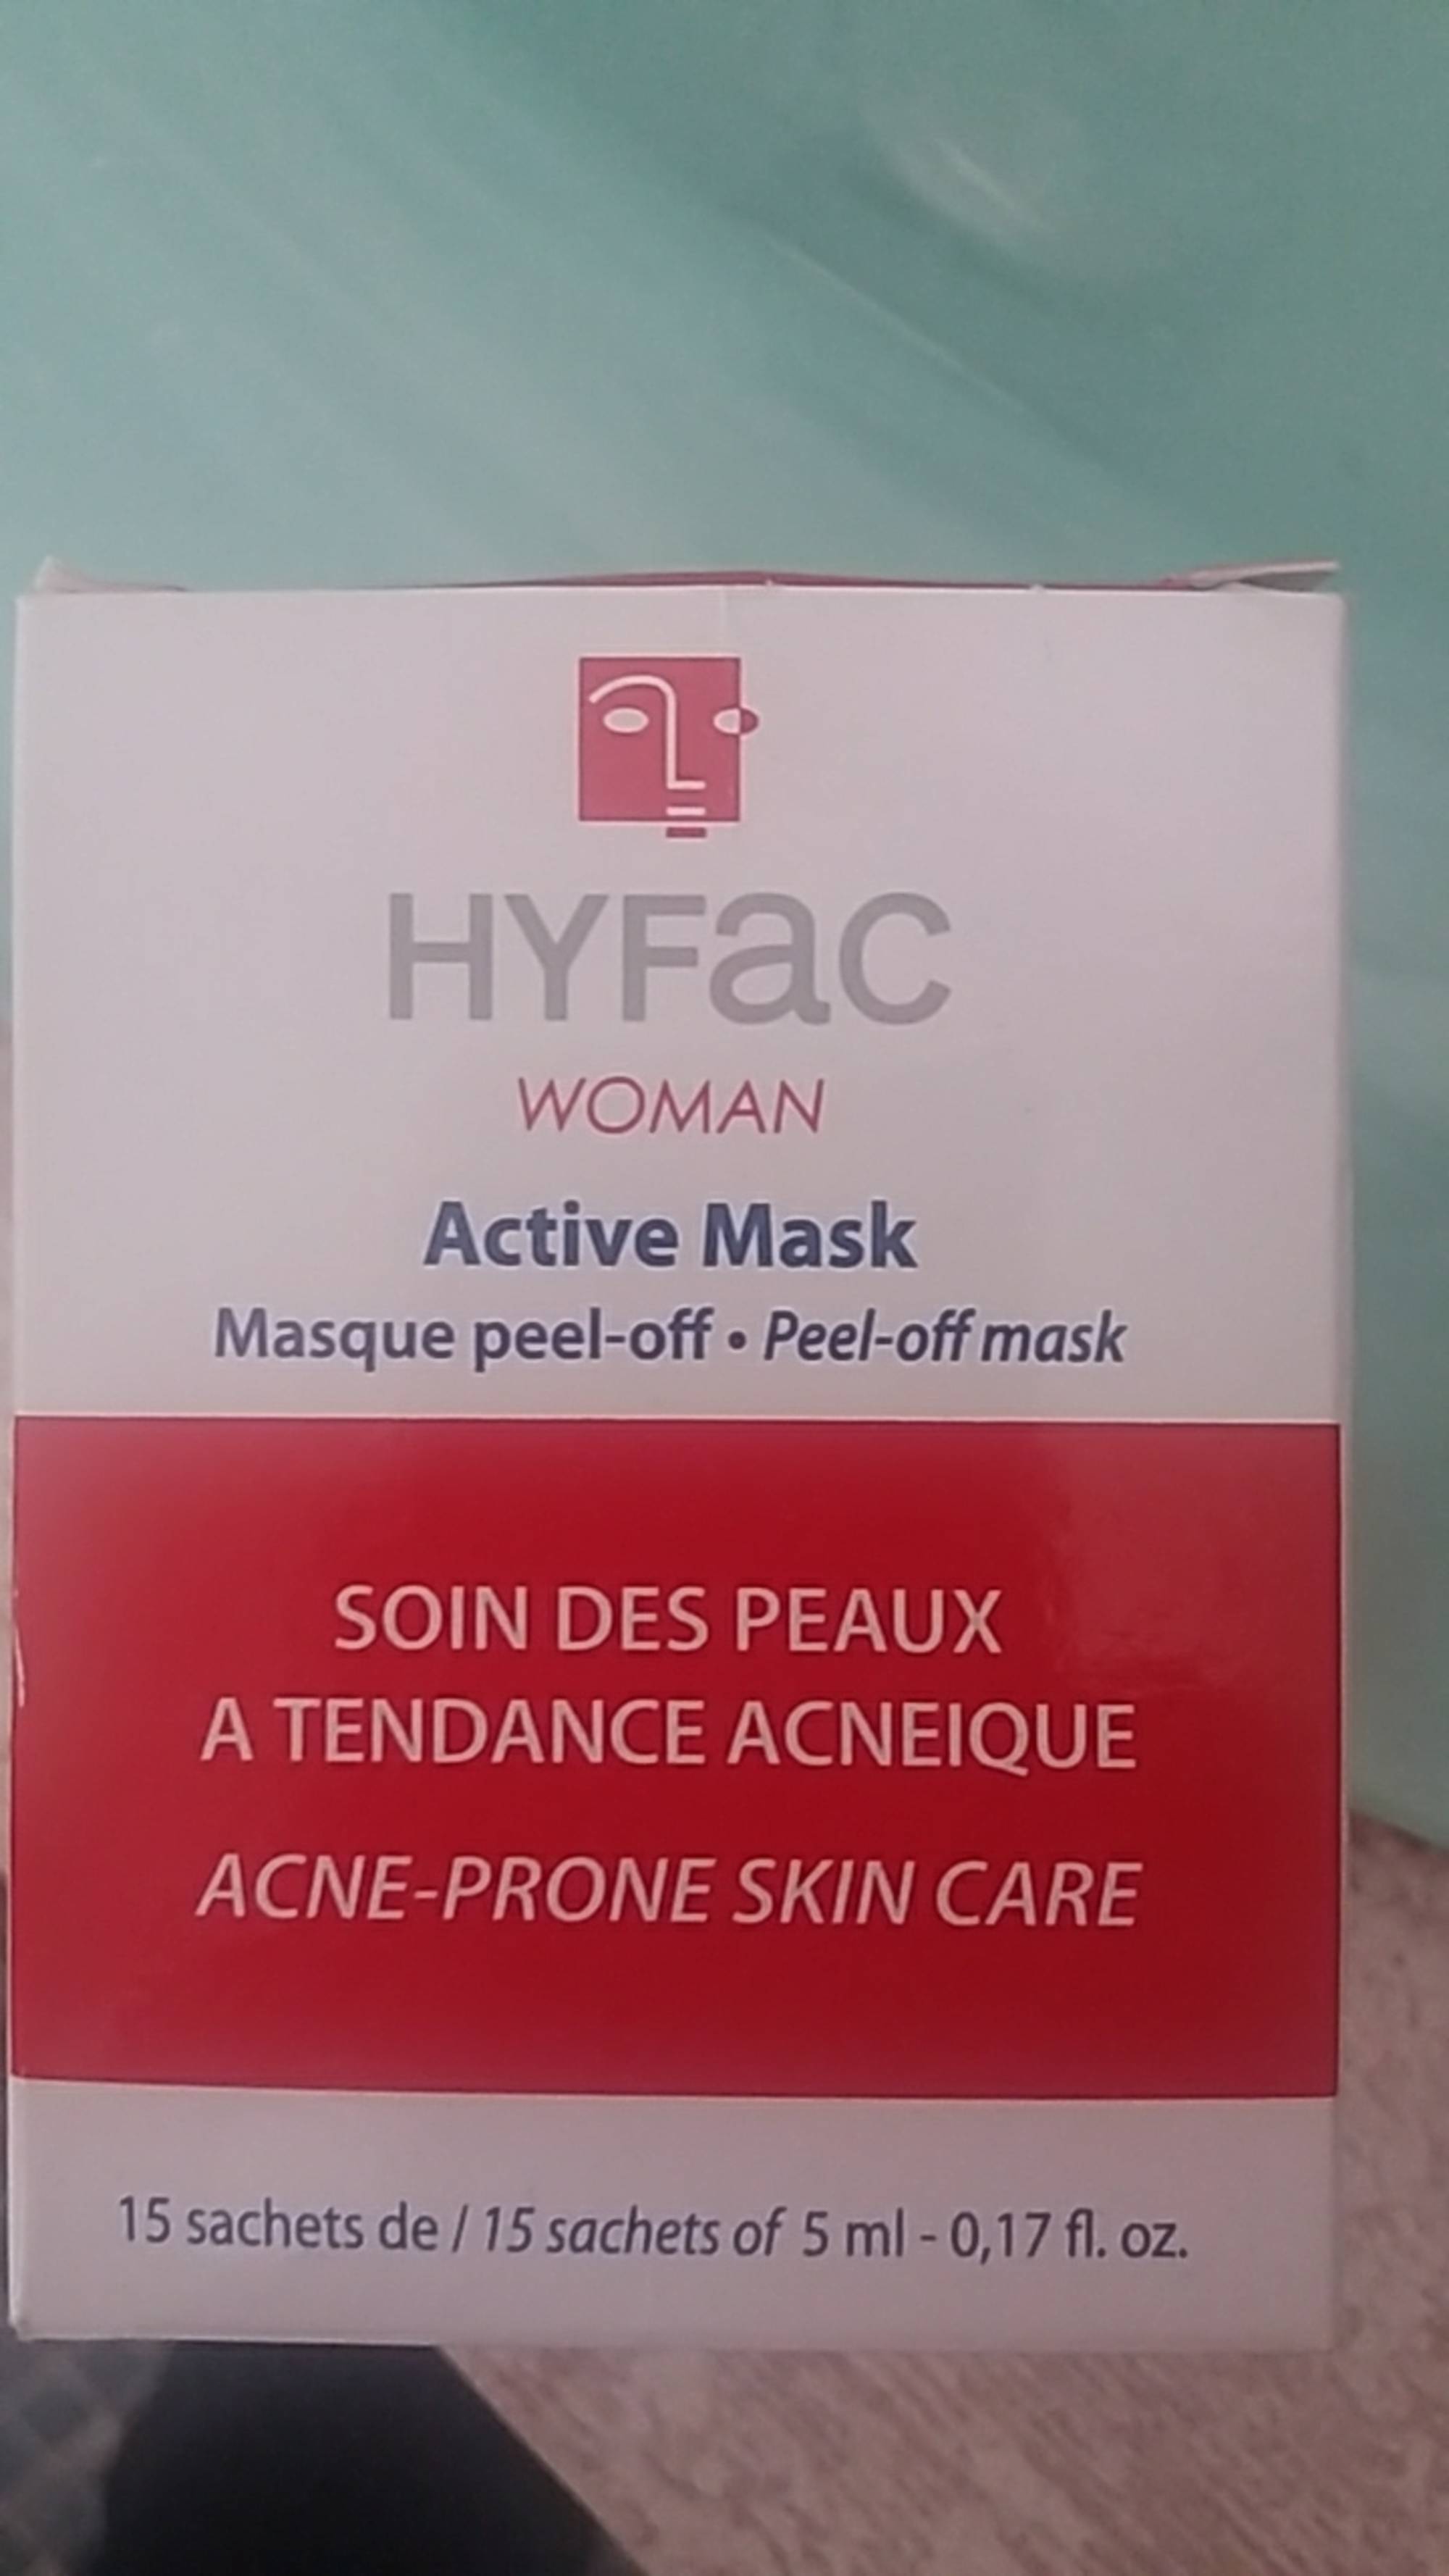 HYFAC - Woman active mask - Masque peel-off